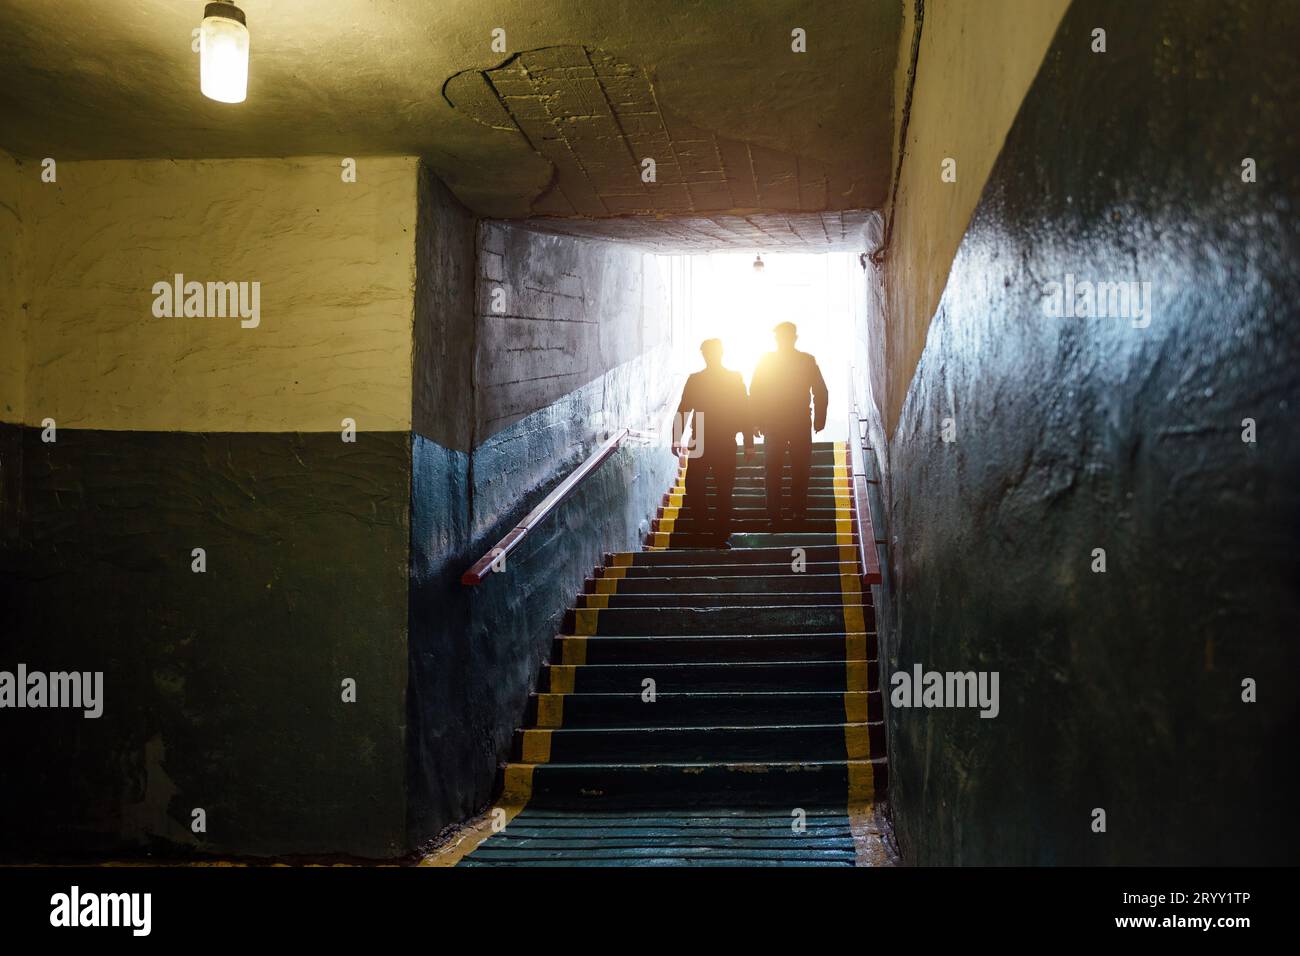 People entering to bomb shelter. Stock Photo